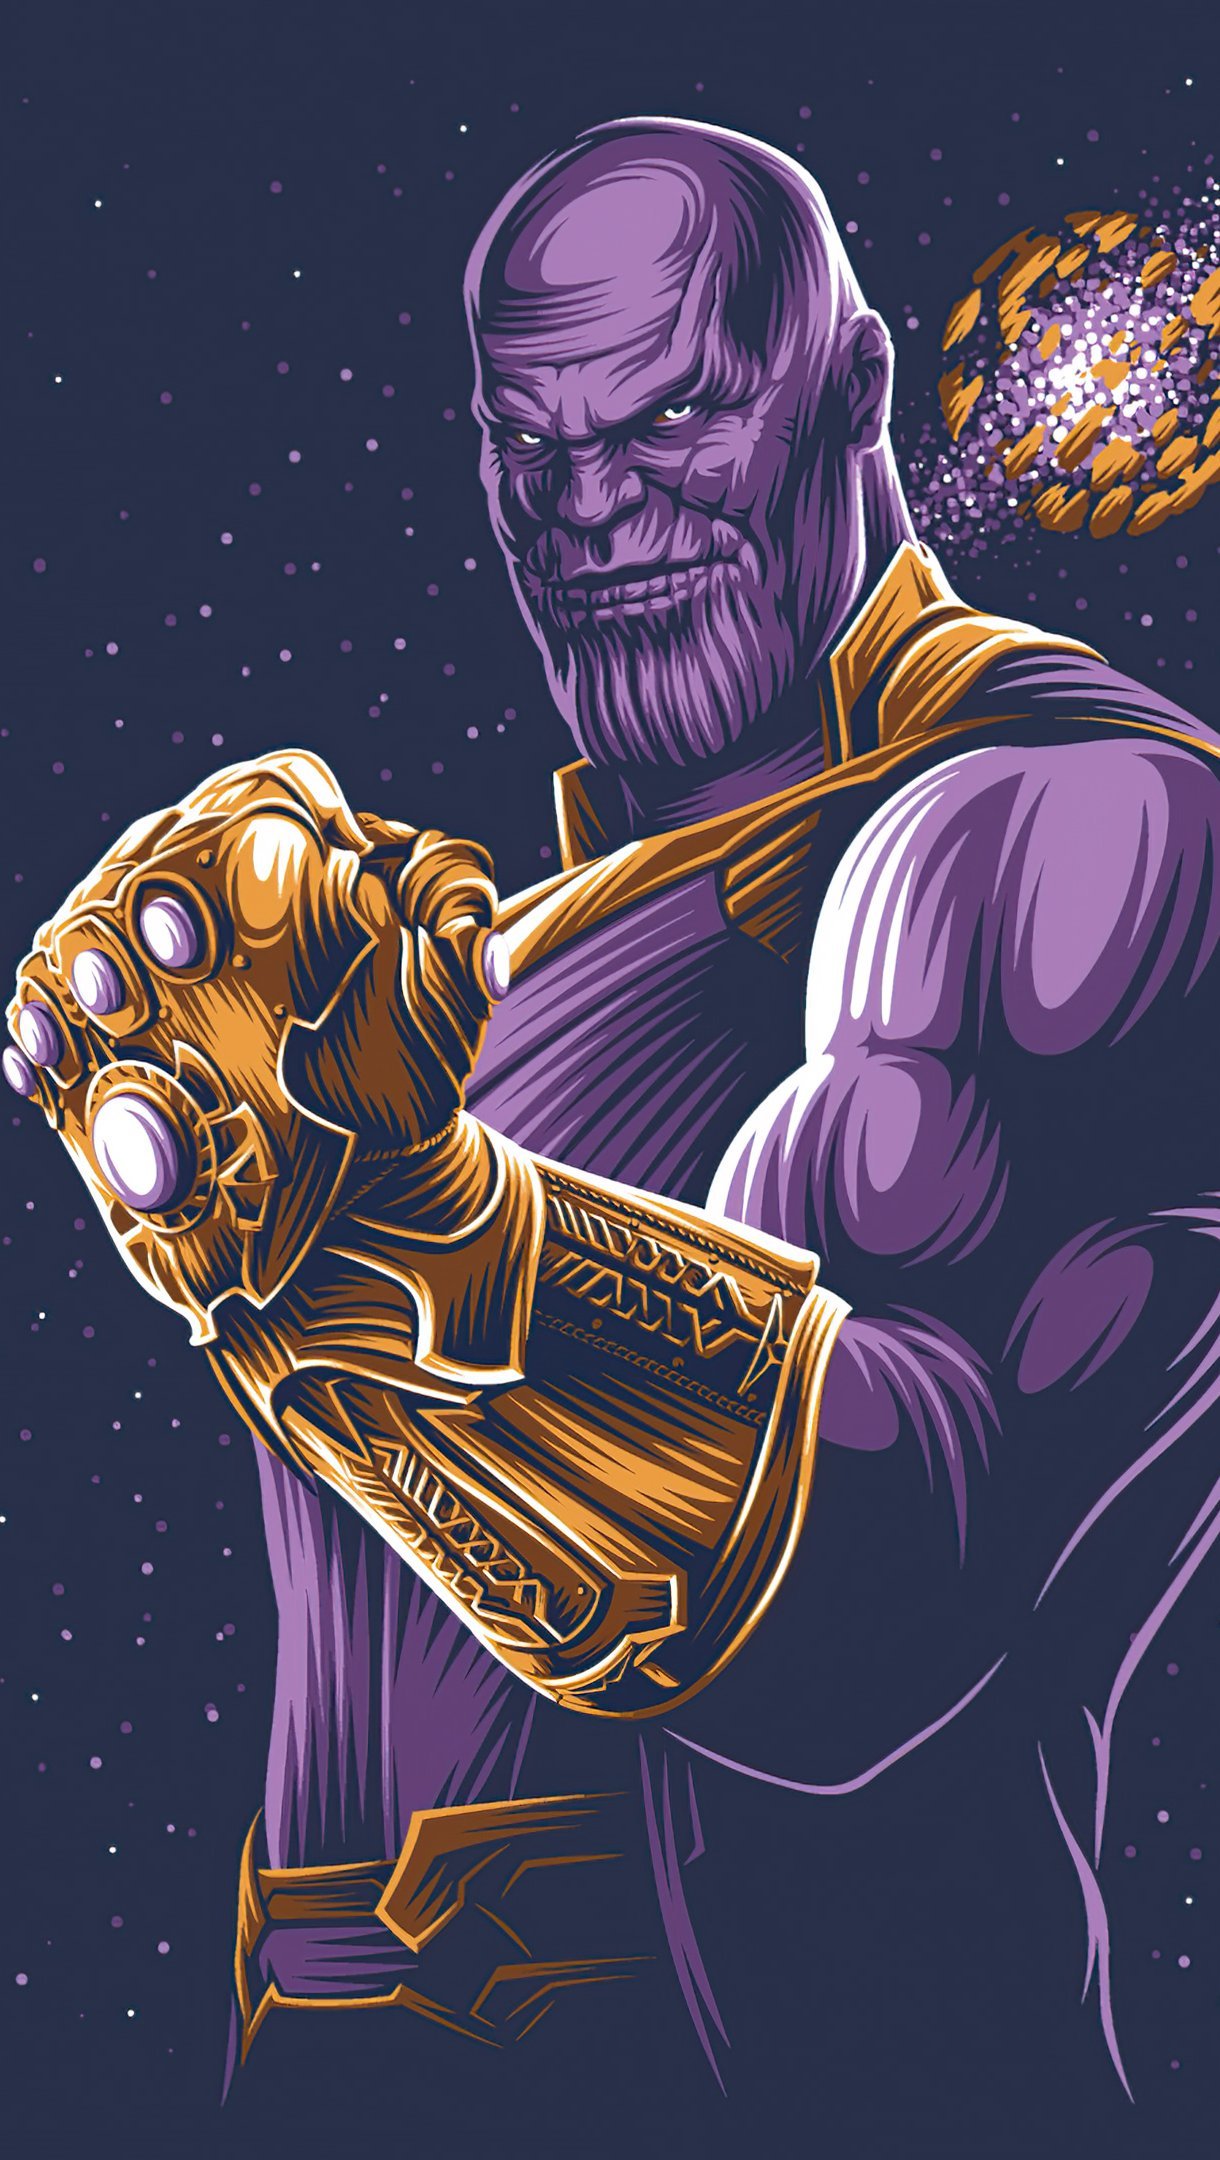 Thanos with Gauntlet Wallpaper 4k Ultra HD ID:8763